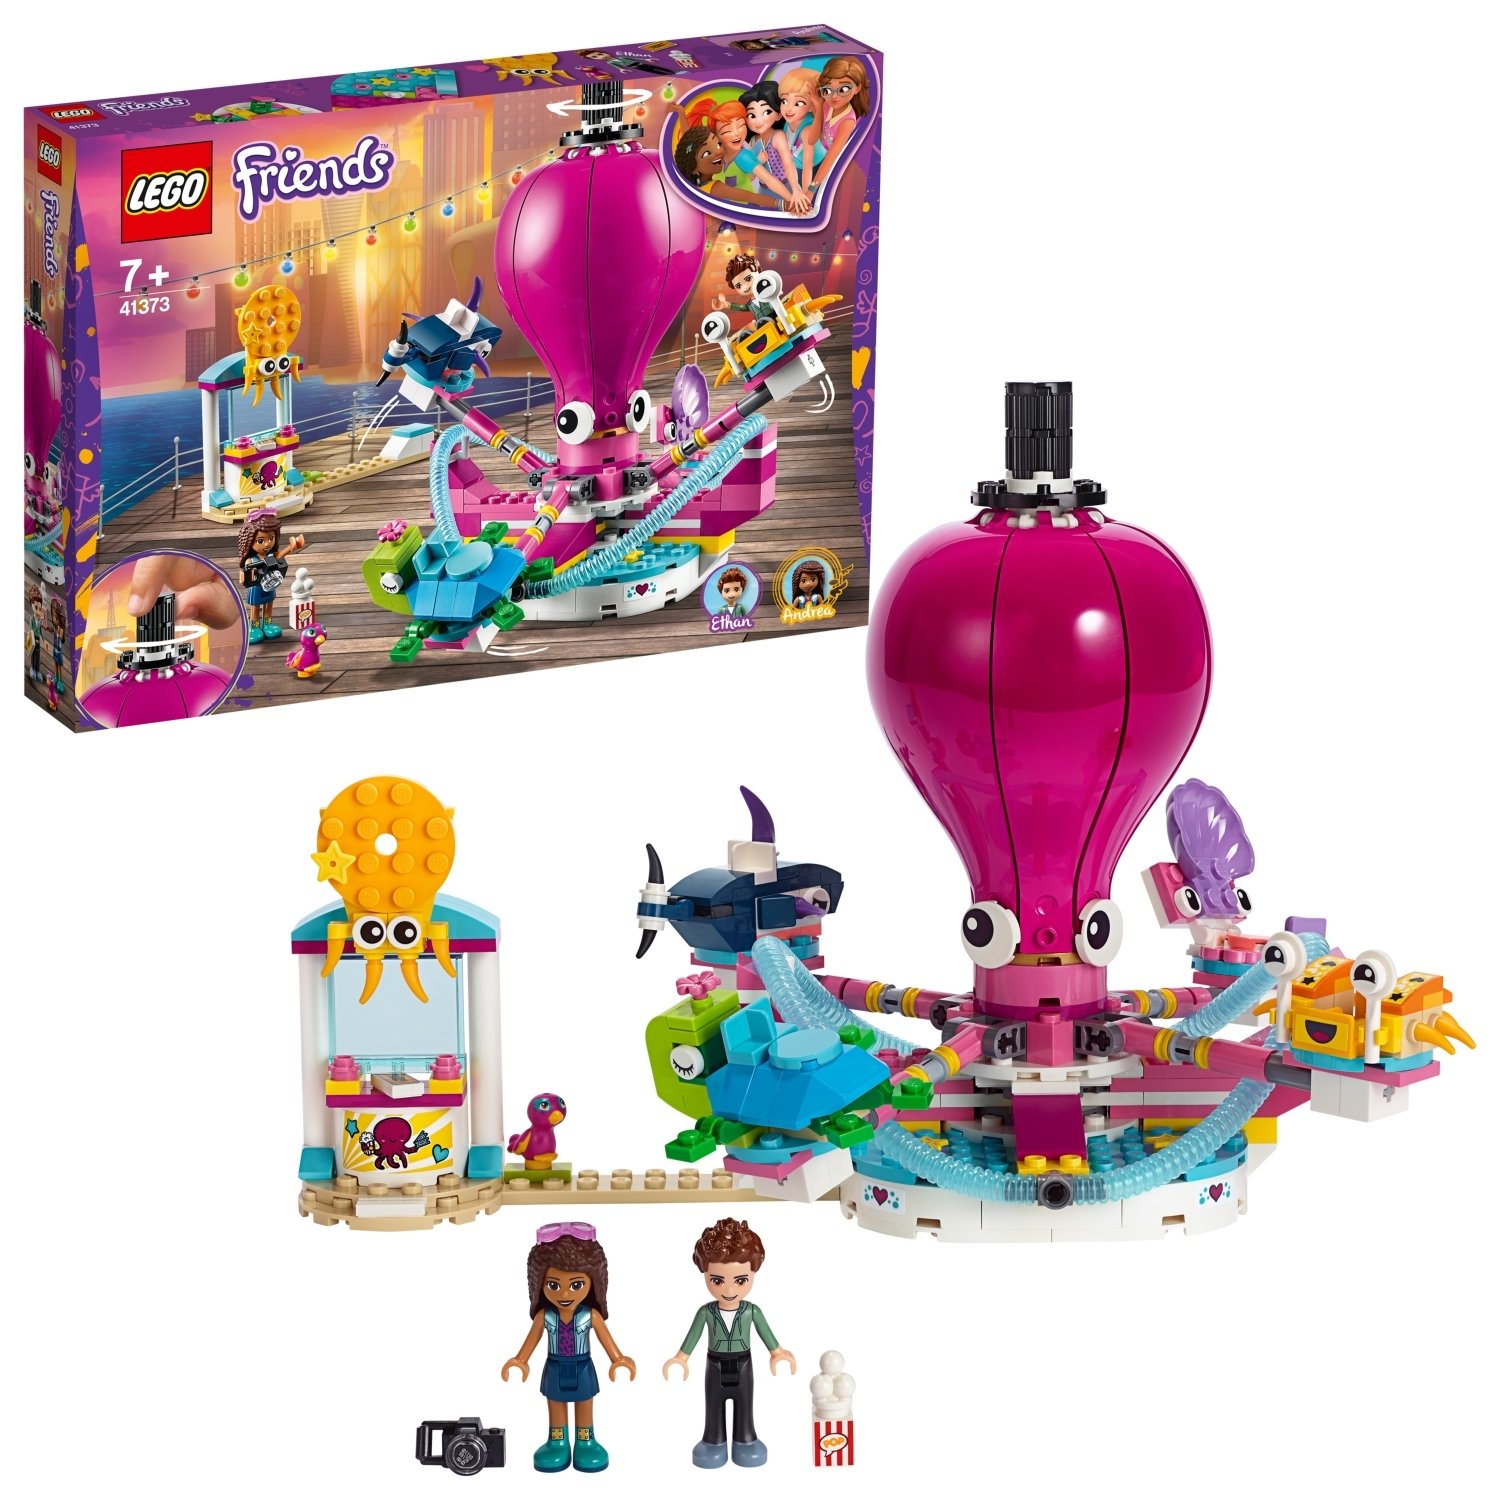 LEGO Friends Funny Octopus Ride Playset - 41373